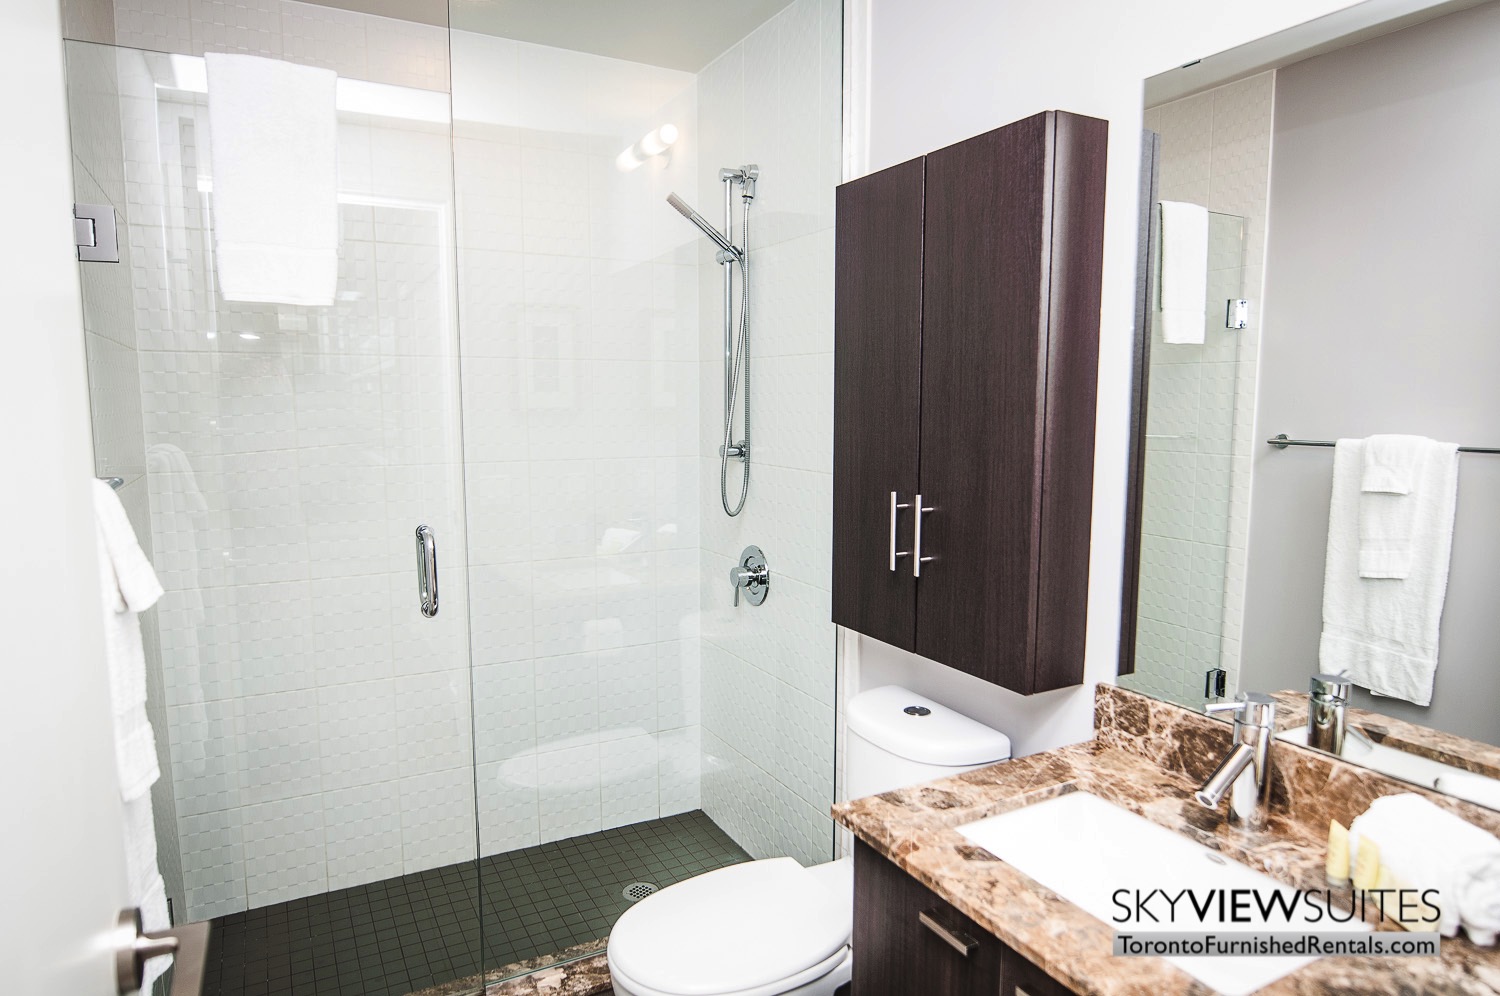 King west corporate rentals toronto bathroom and shower